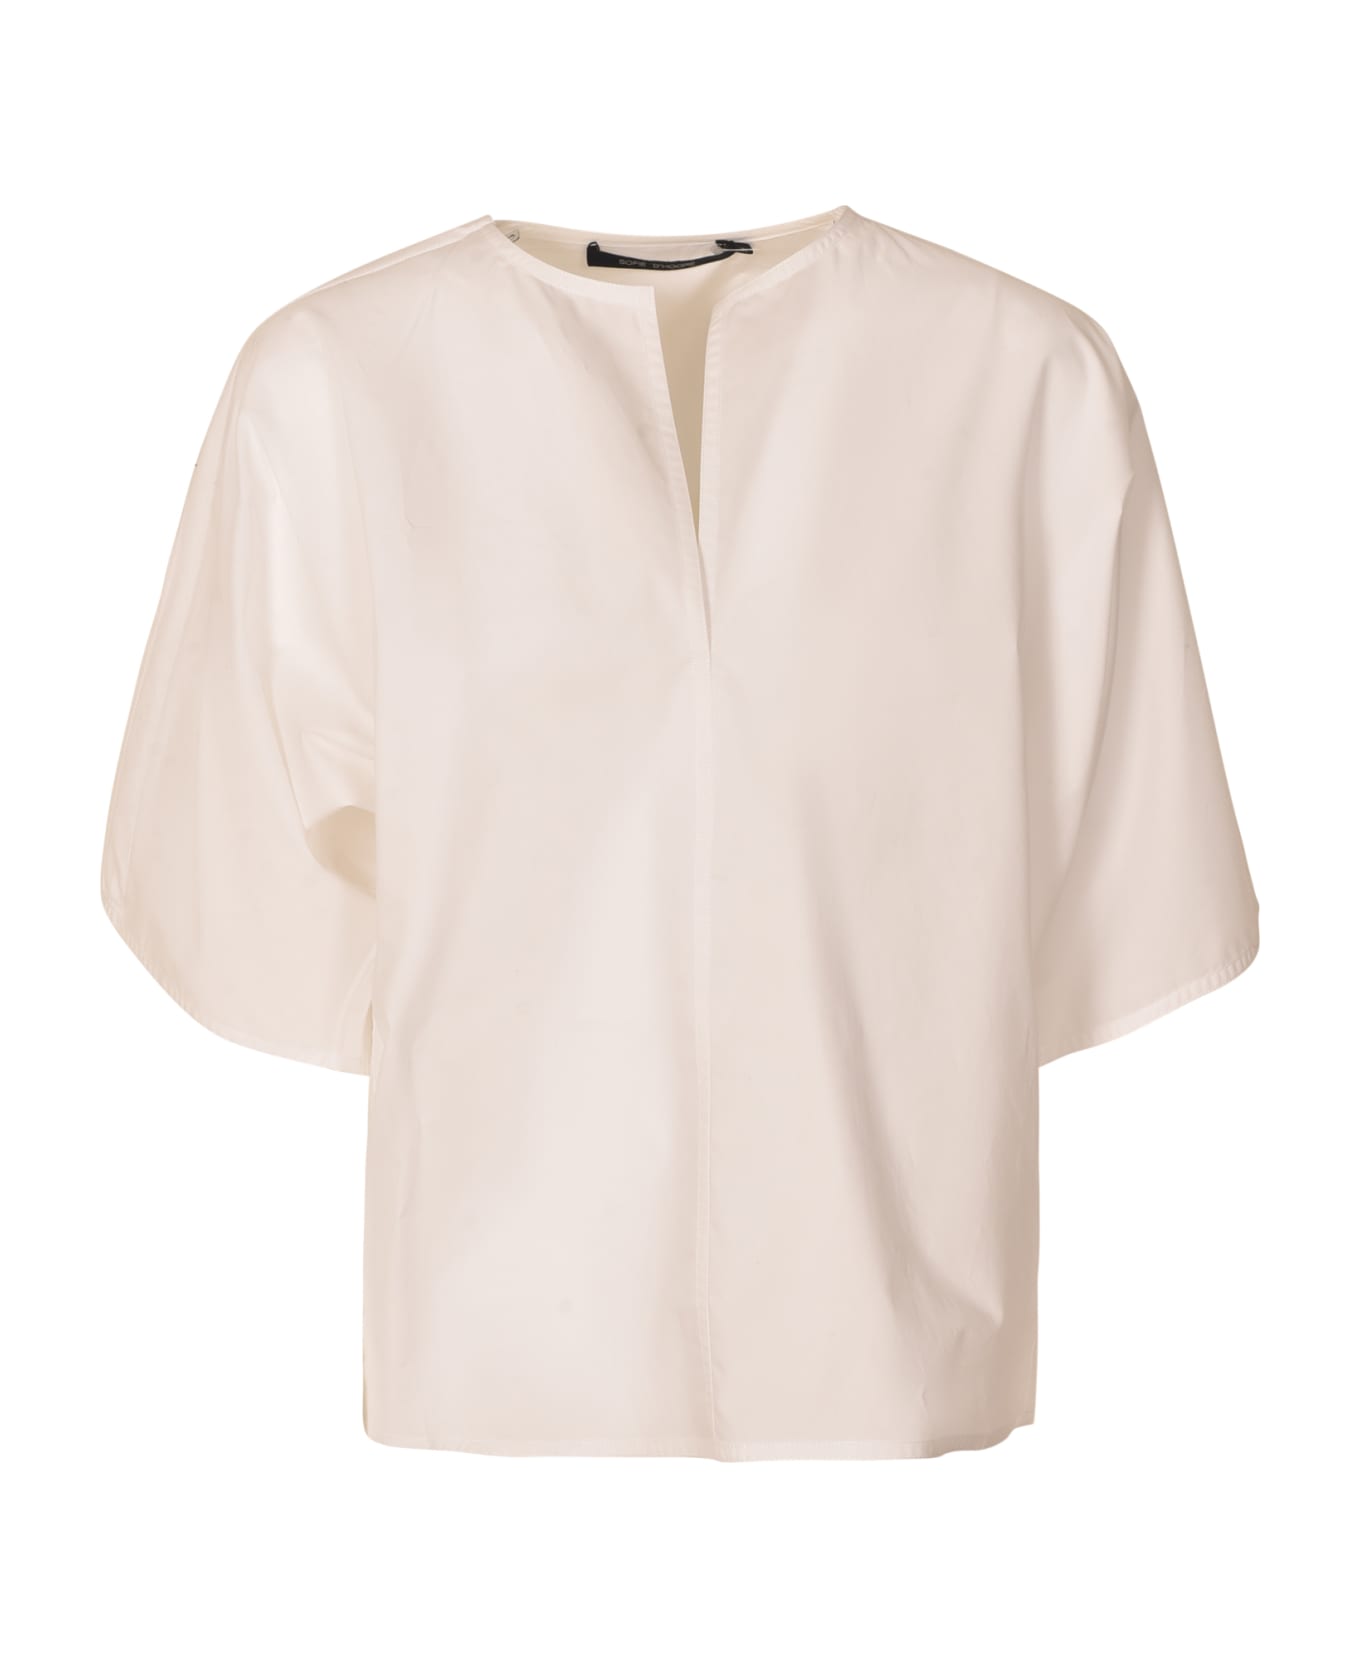 Sofie d'Hoore Cropped Blouse - White